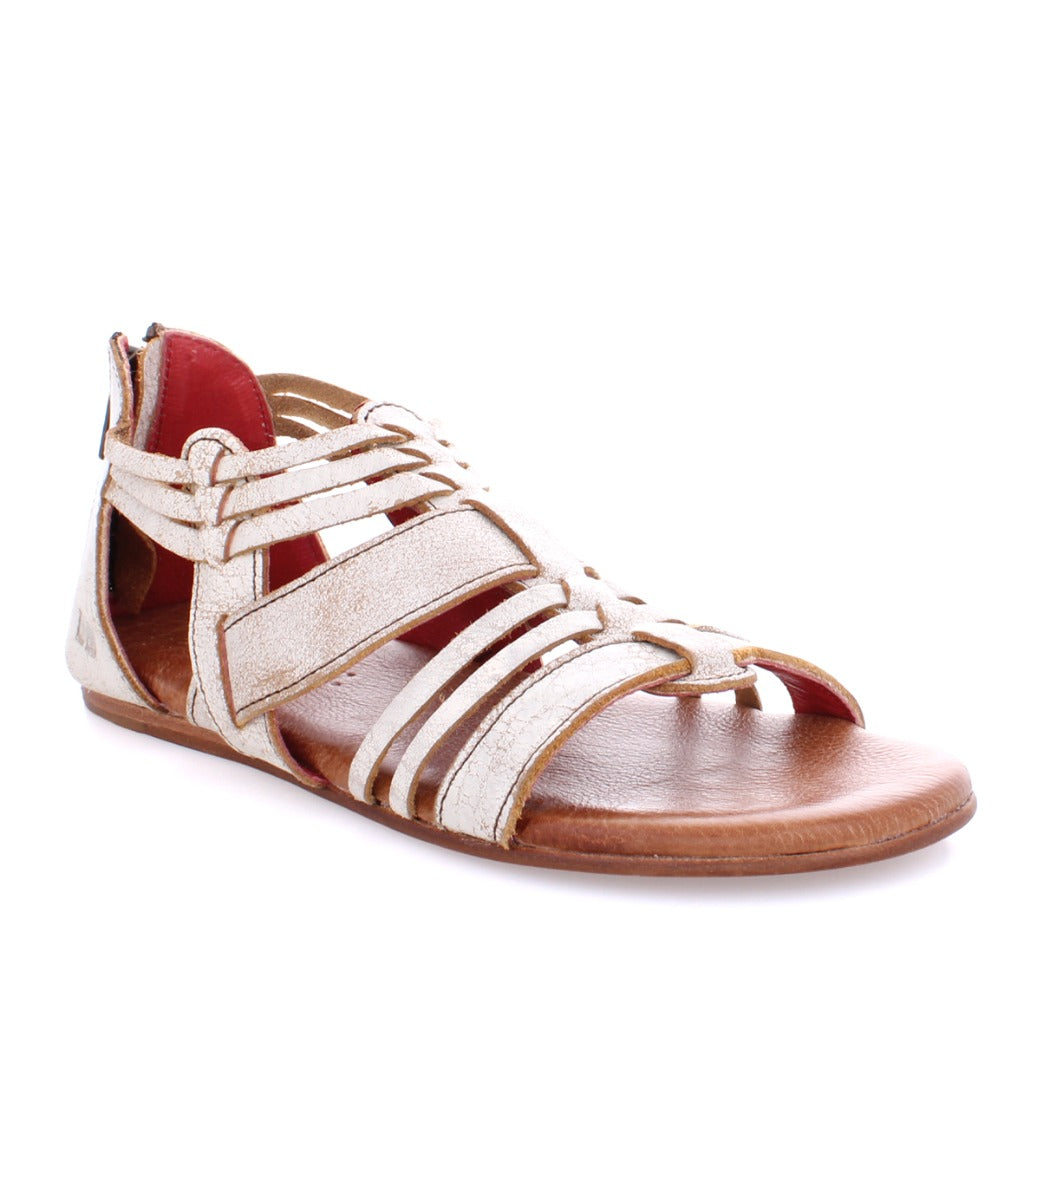 A women's white Bed Stu sandal with red straps.